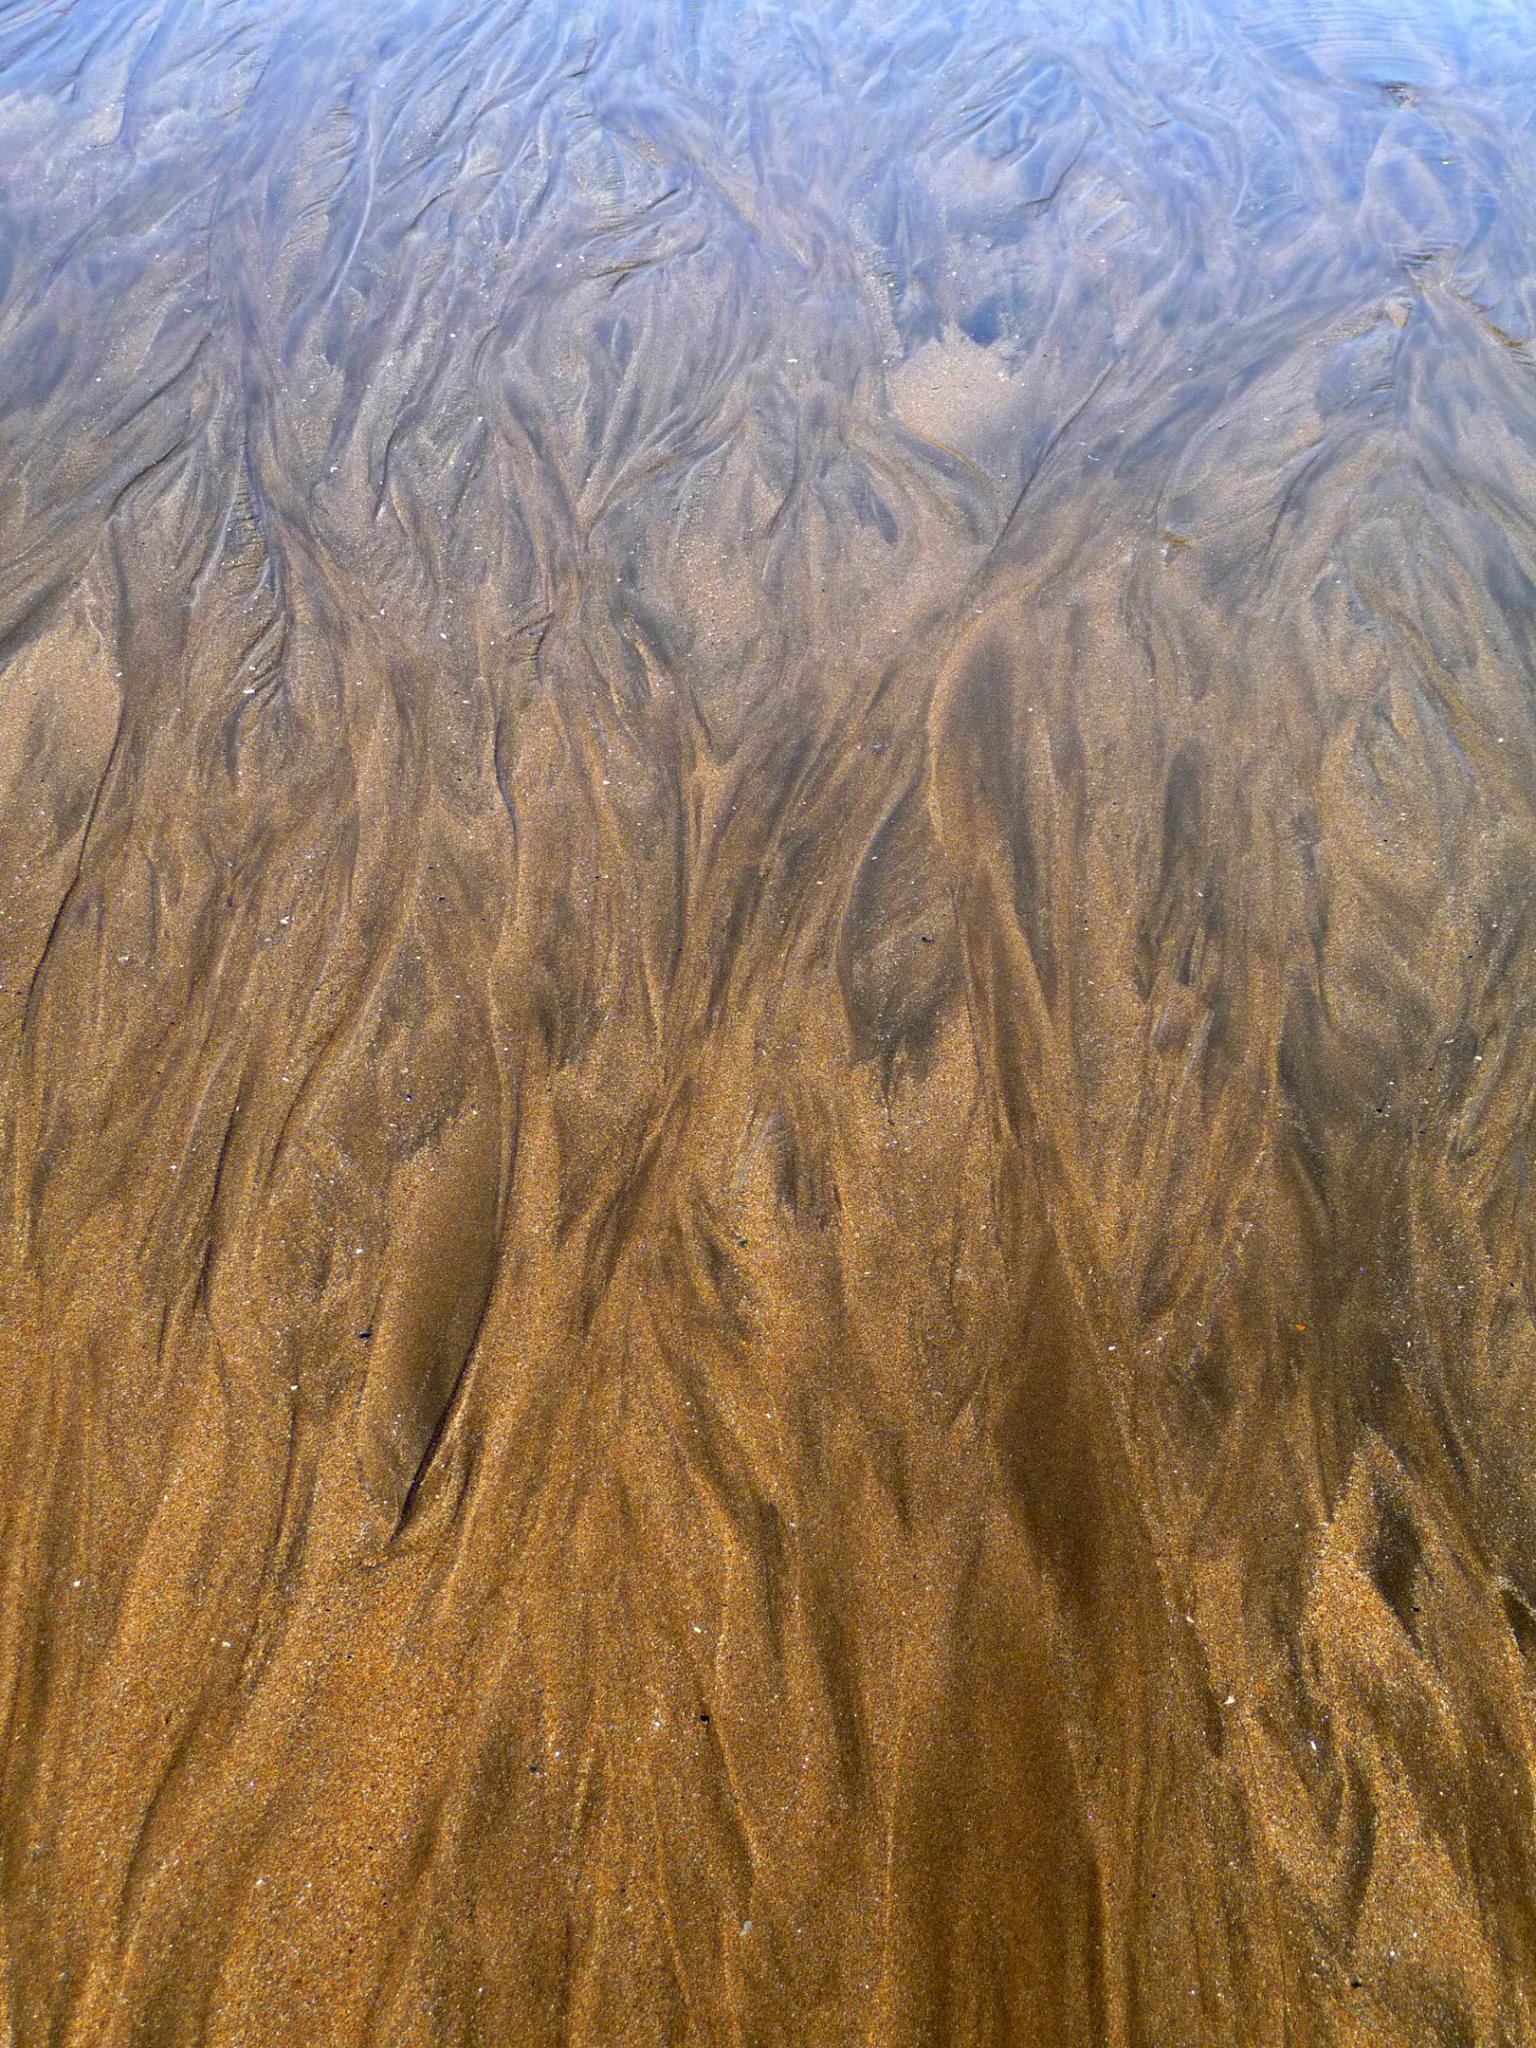 A natural formation of a pattern in sand at a beach